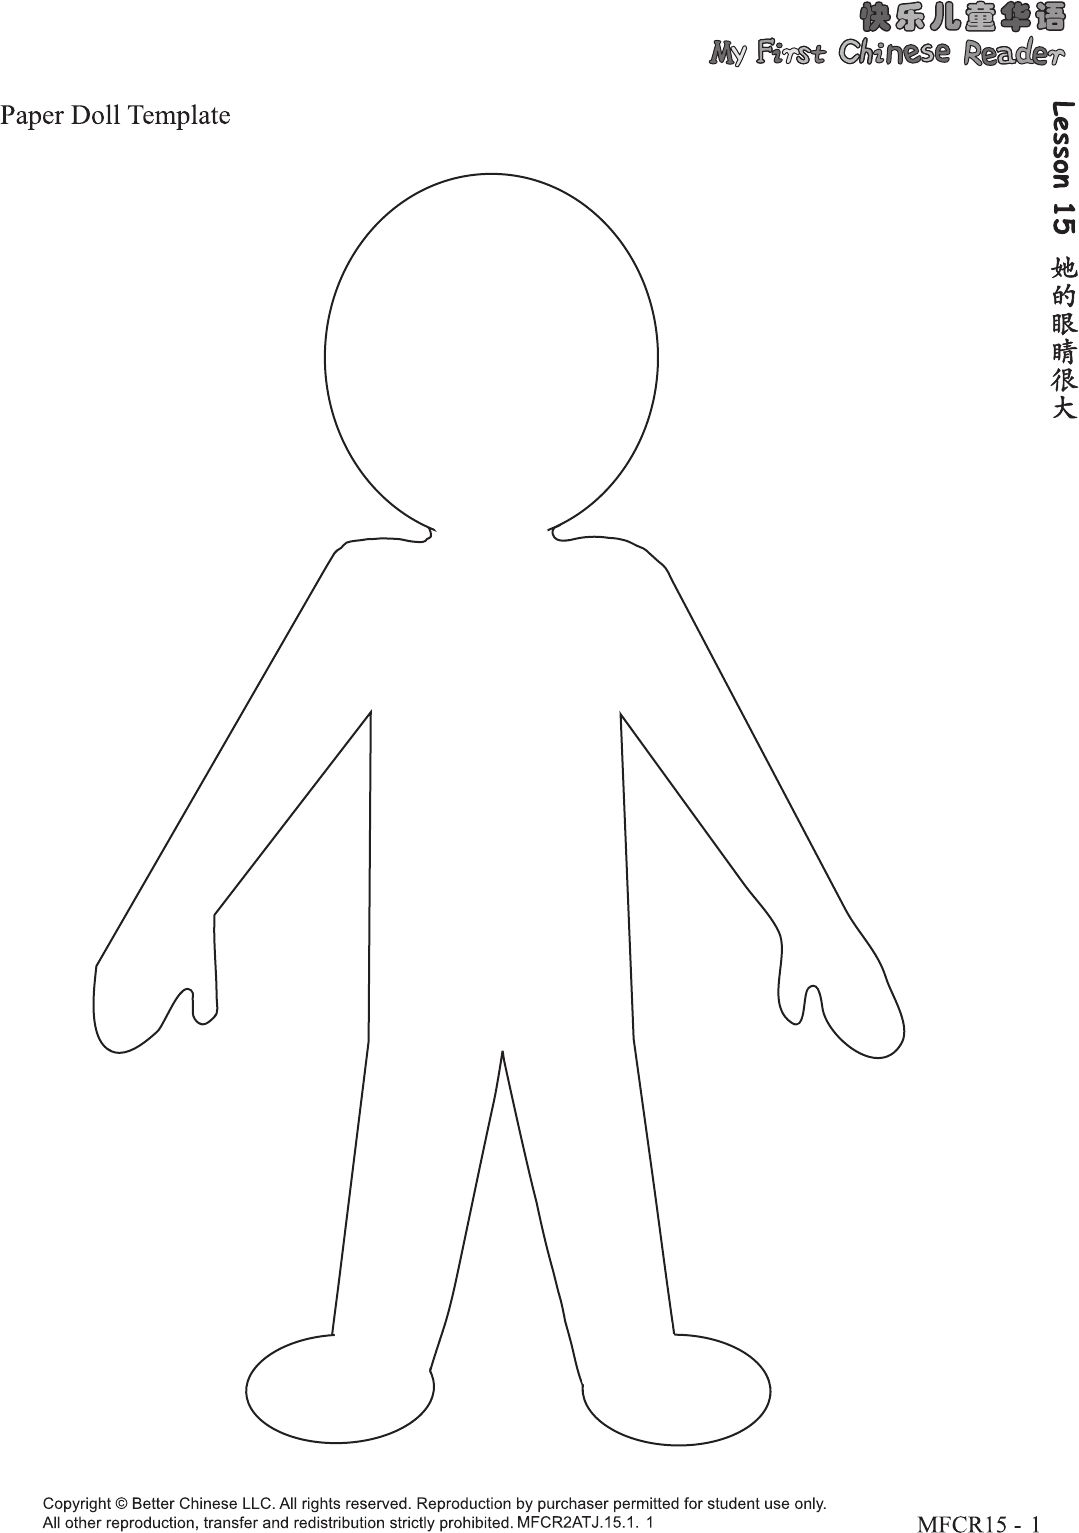 printable-paper-doll-template-free-printable-templates